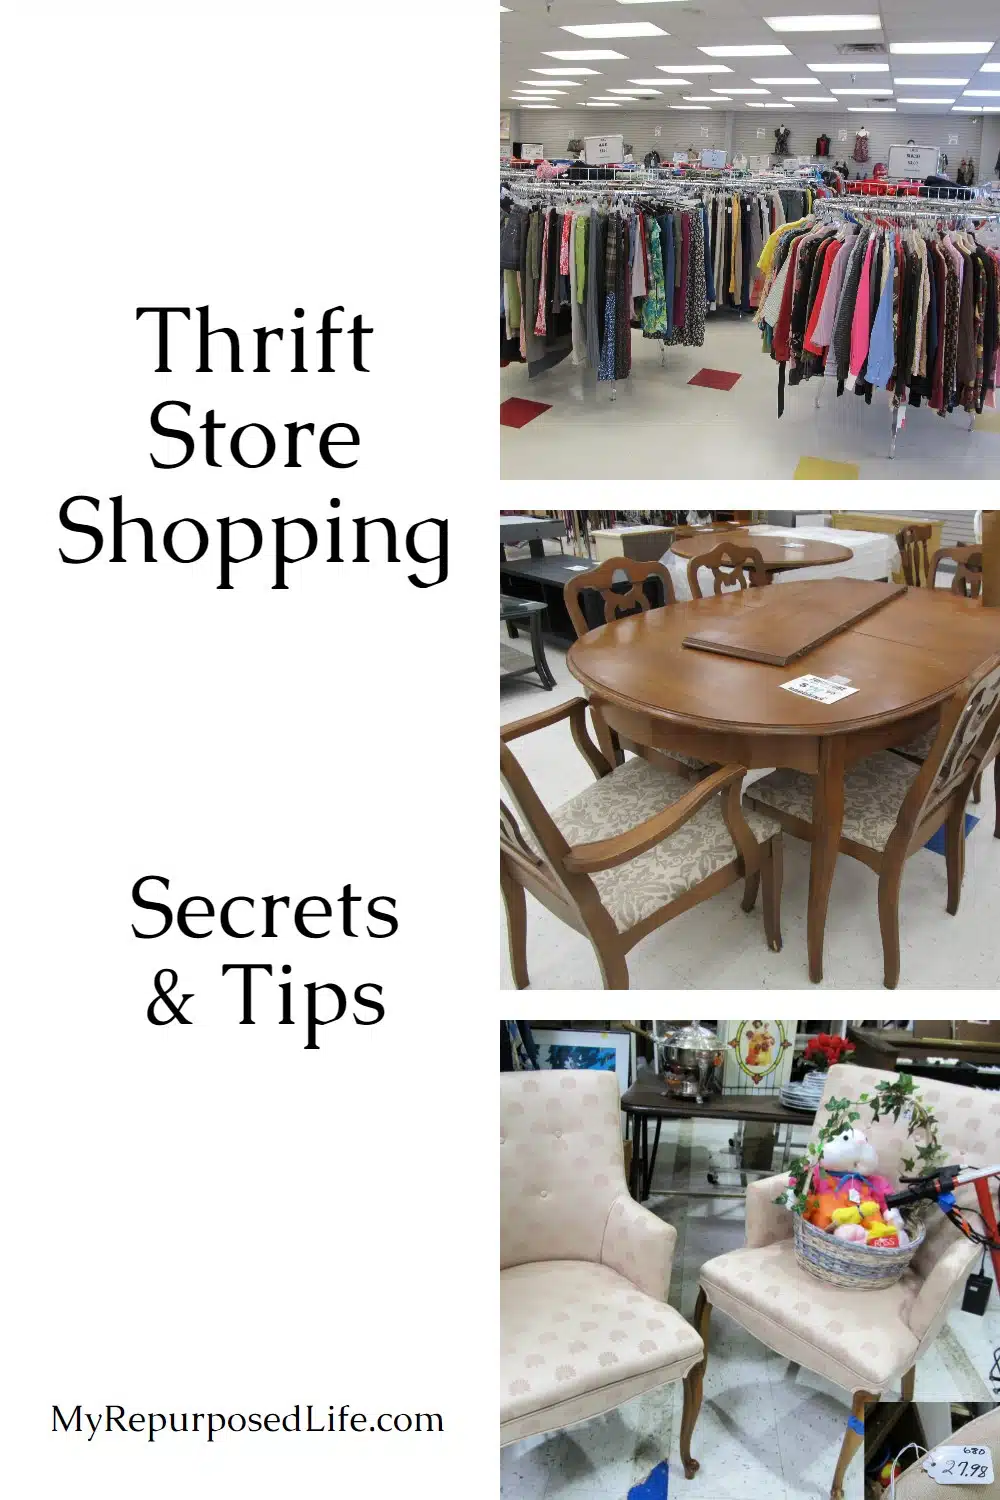 Thrift Store Shopping experts share their best tips and secrets to help you navigate thrift stores for the best deals. WHERE, WHEN, HOW to get the best deals. #MyRepurposedLife #thrifting #thriftshopping via @repurposedlife